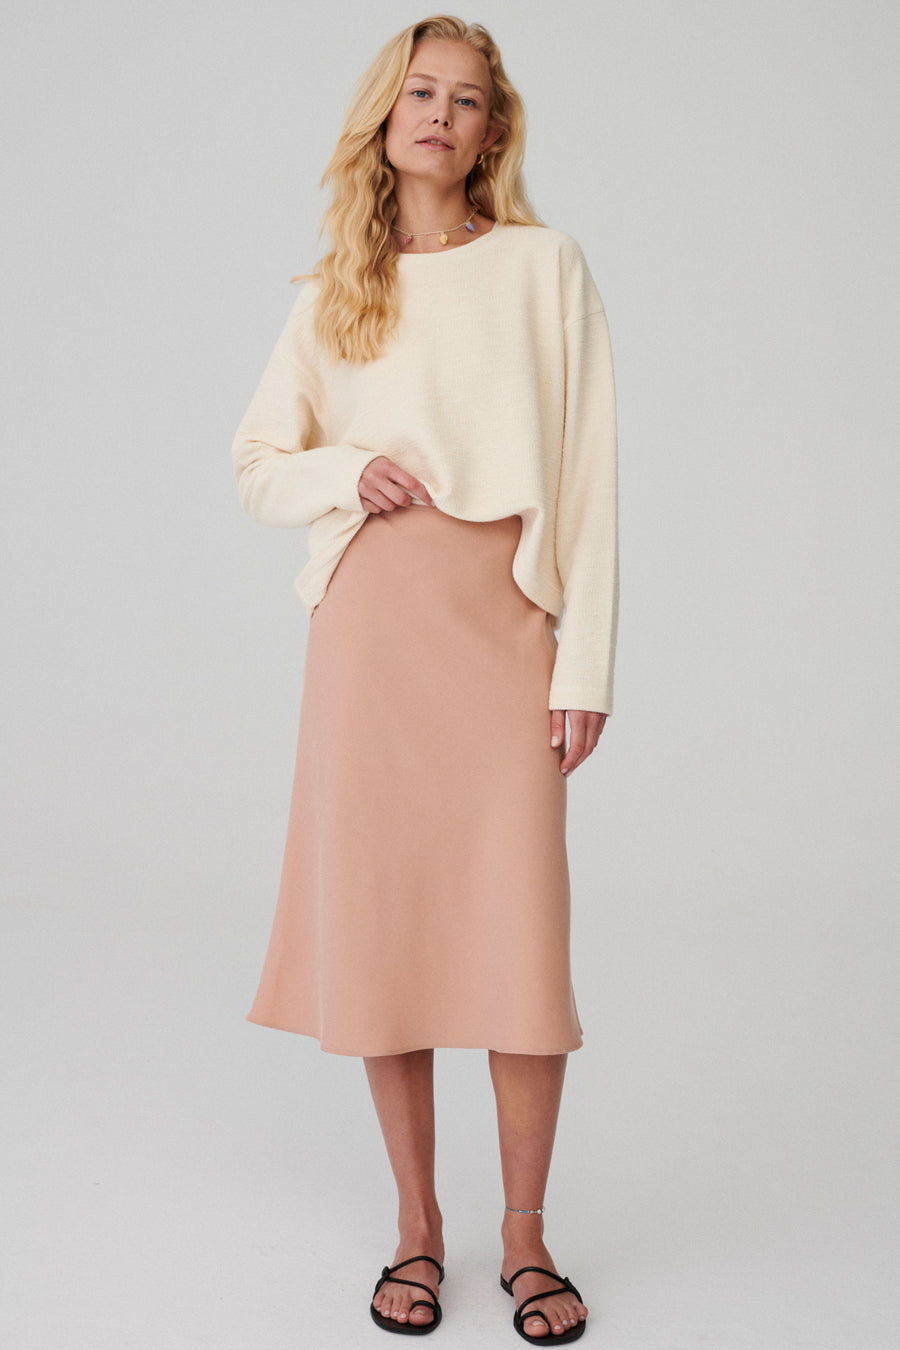 Tencel skirt / 07 / 05 / peach flower *sweatshirt-in-cotton-14-04-unbleached* ?The model is 173 cm high and wears size S?